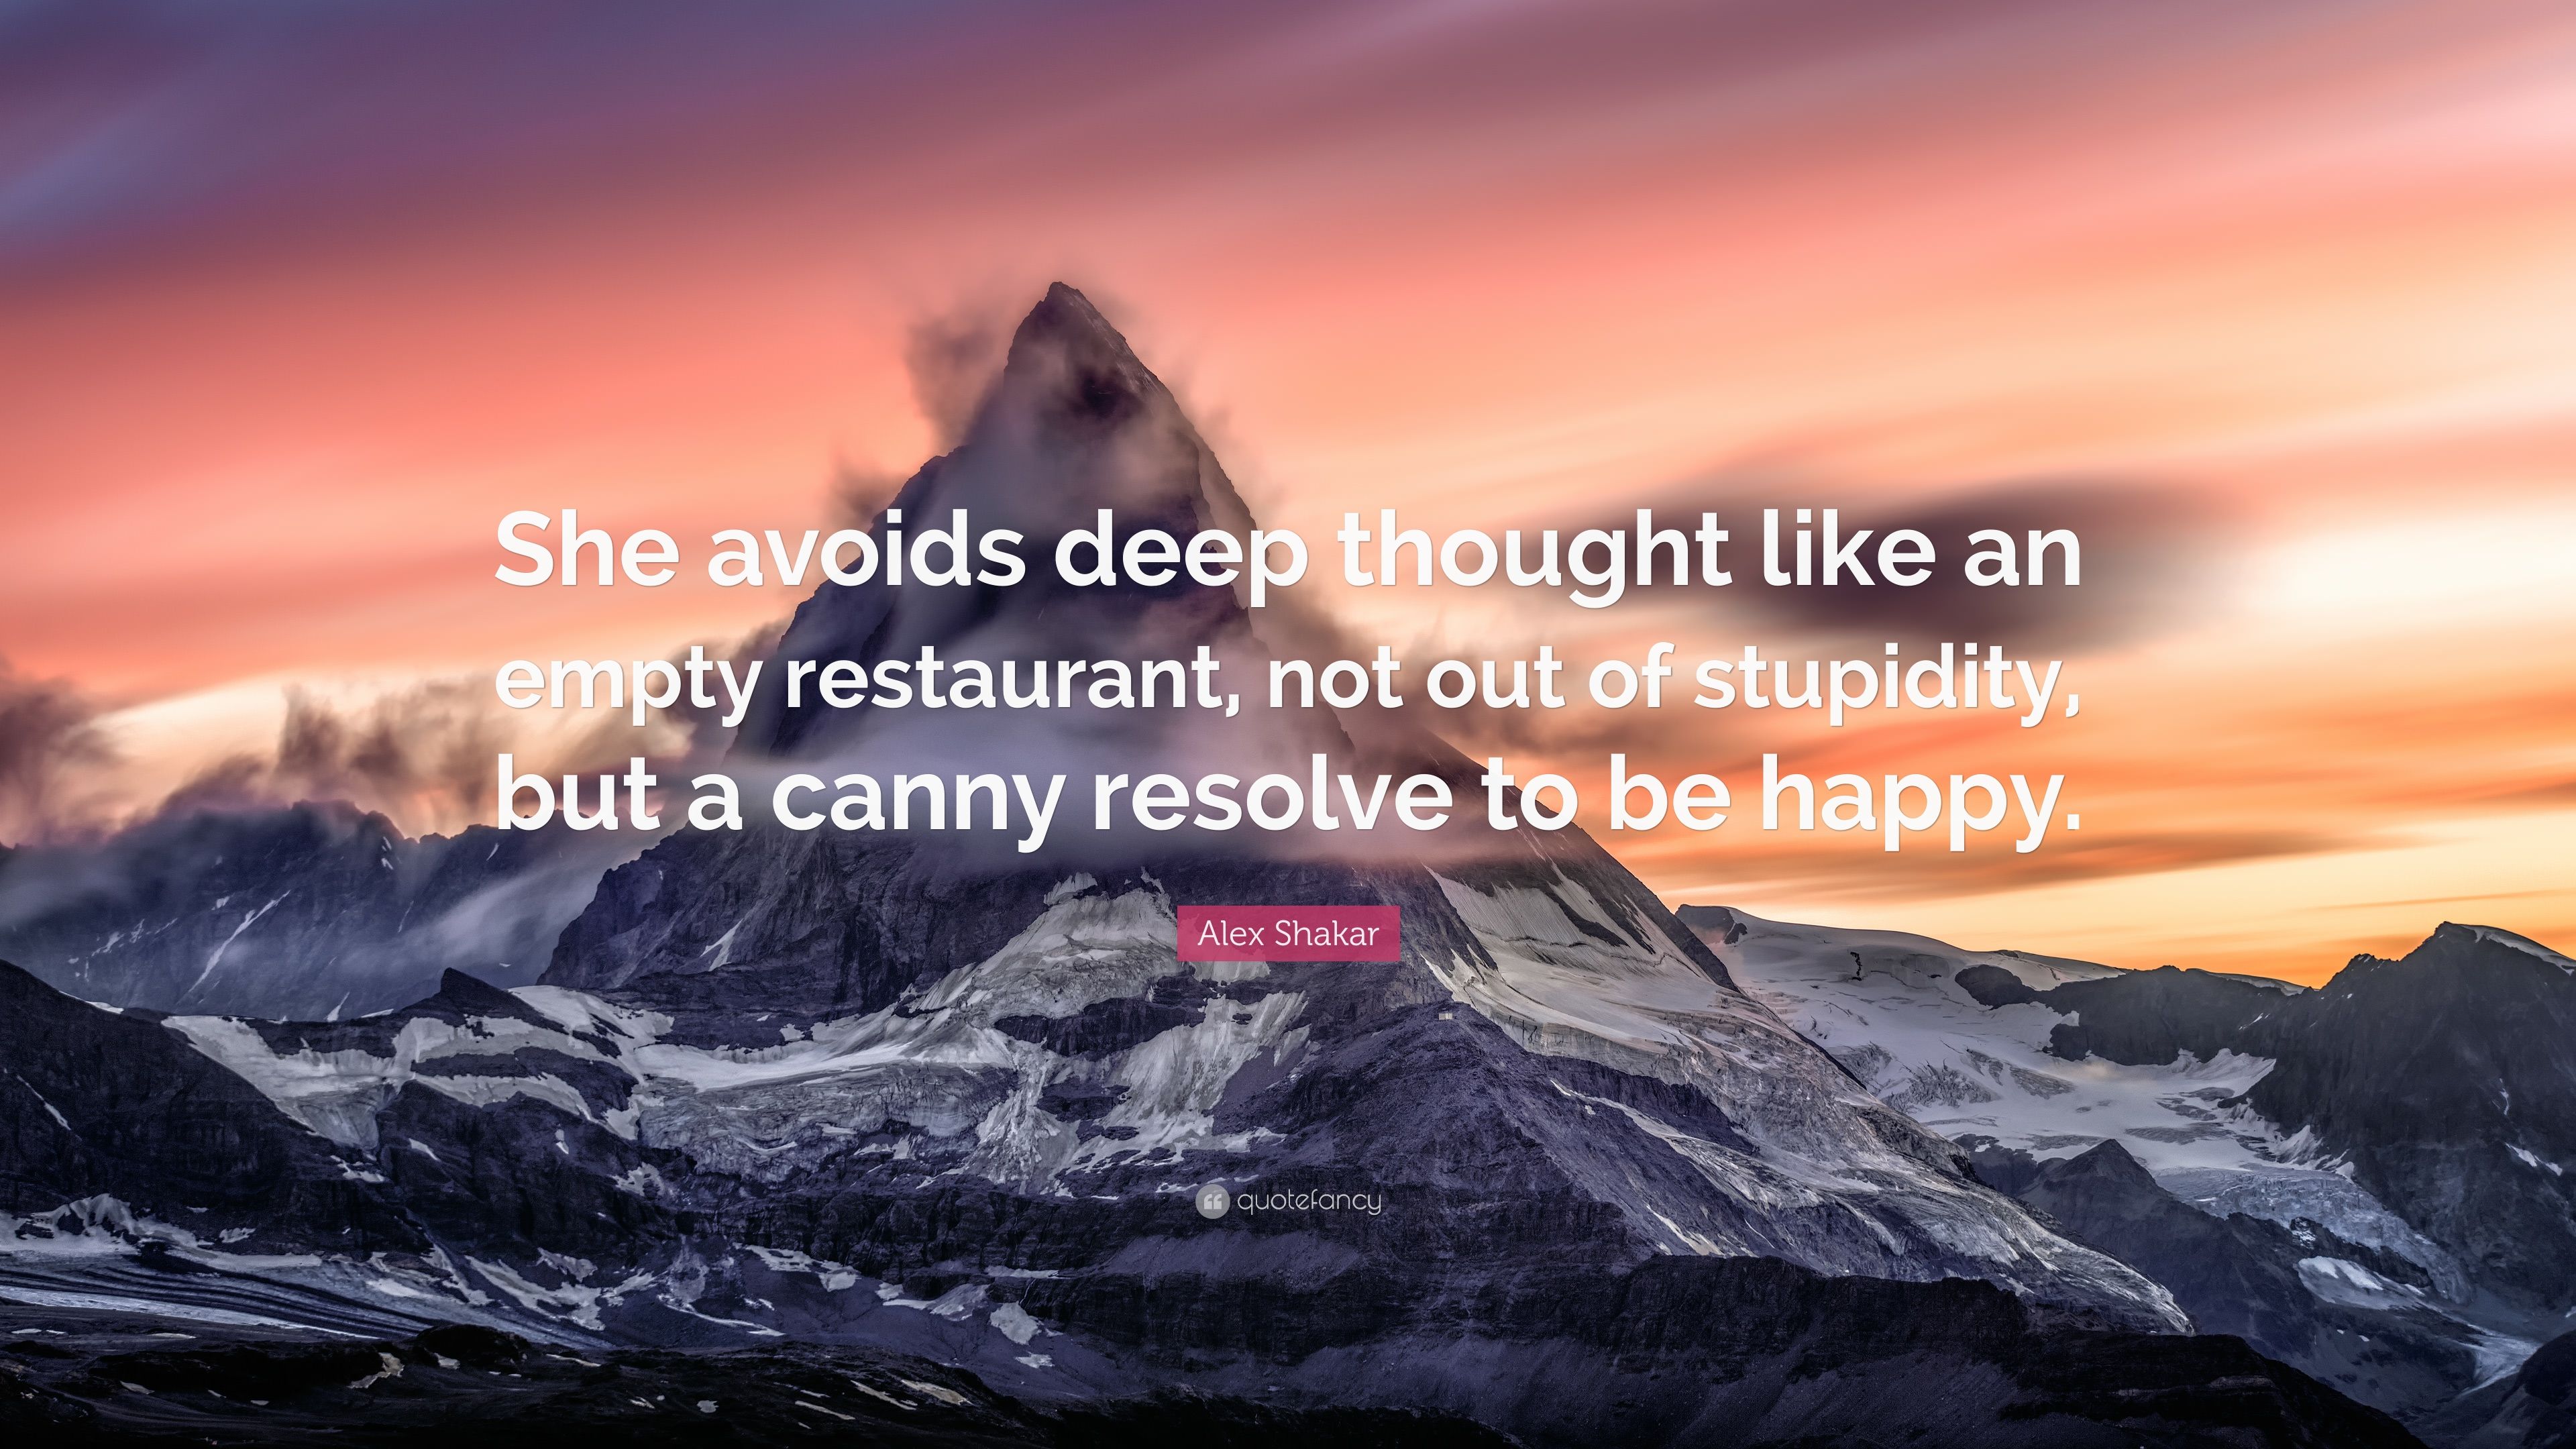 Alex Shakar Quote: “She avoids deep thought like an empty restaurant, not out of stupidity, but